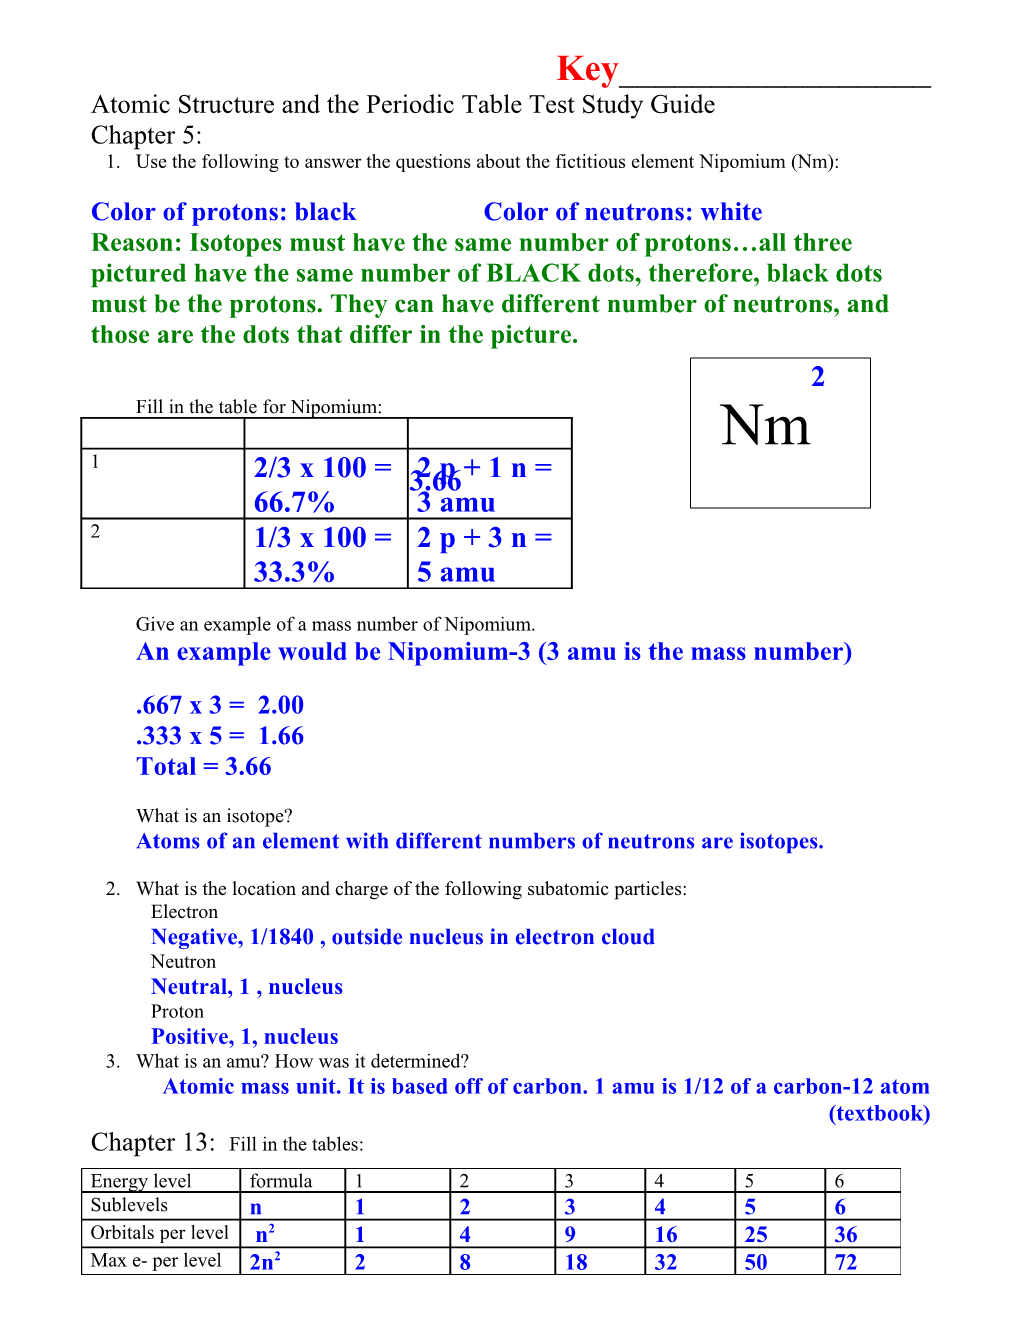 Atomic Structure and the Periodic Table Test Study Guide